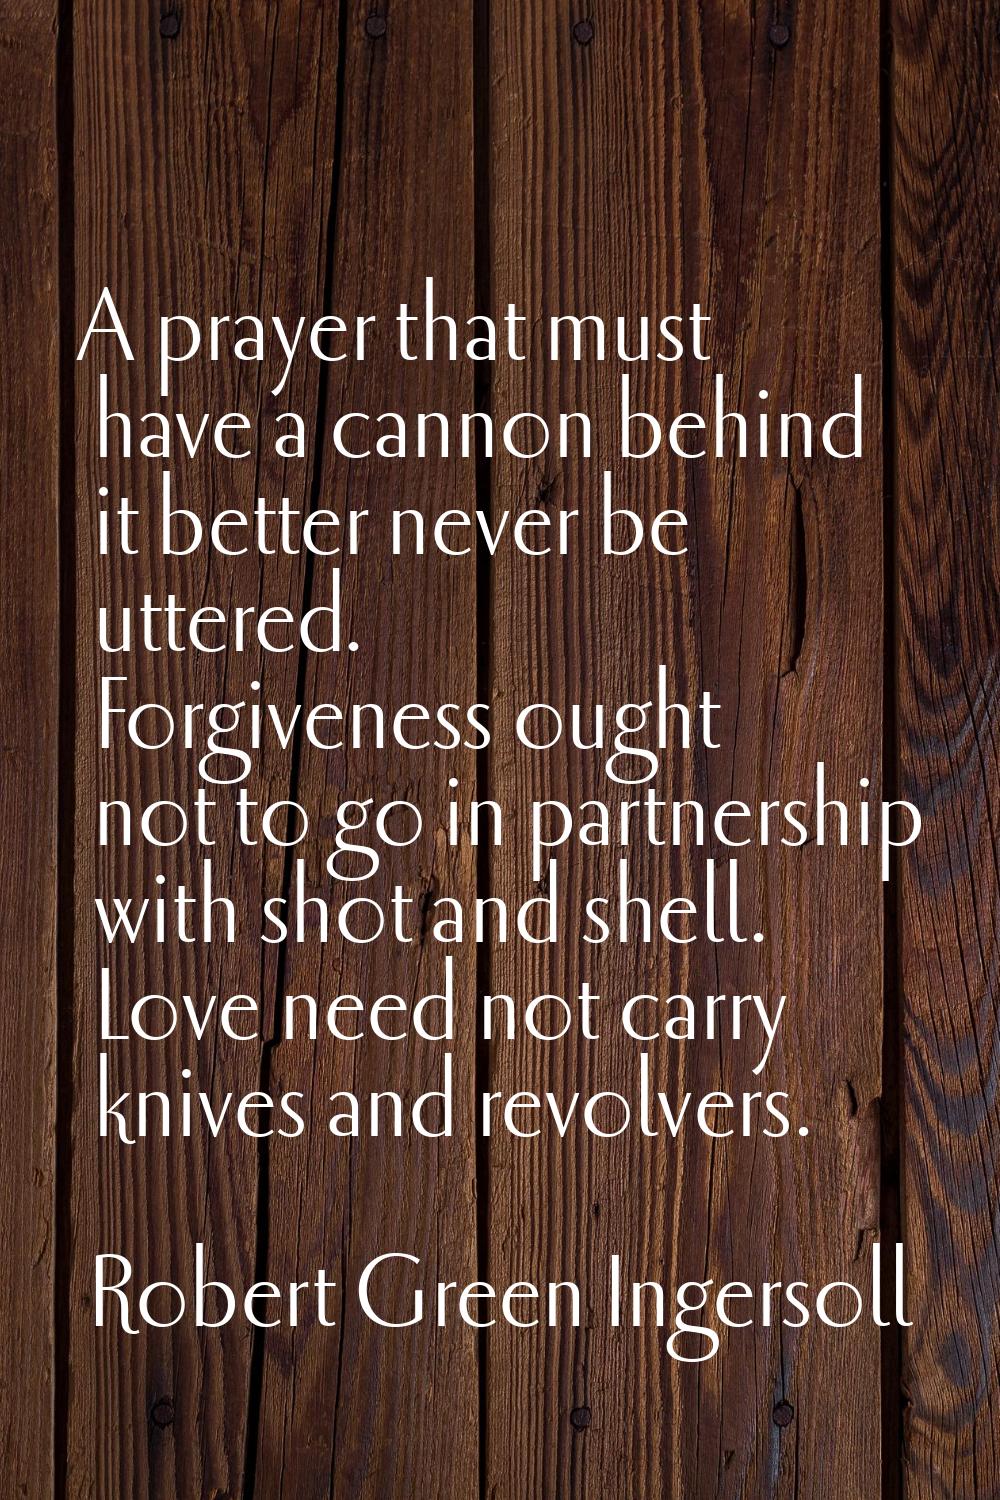 A prayer that must have a cannon behind it better never be uttered. Forgiveness ought not to go in 